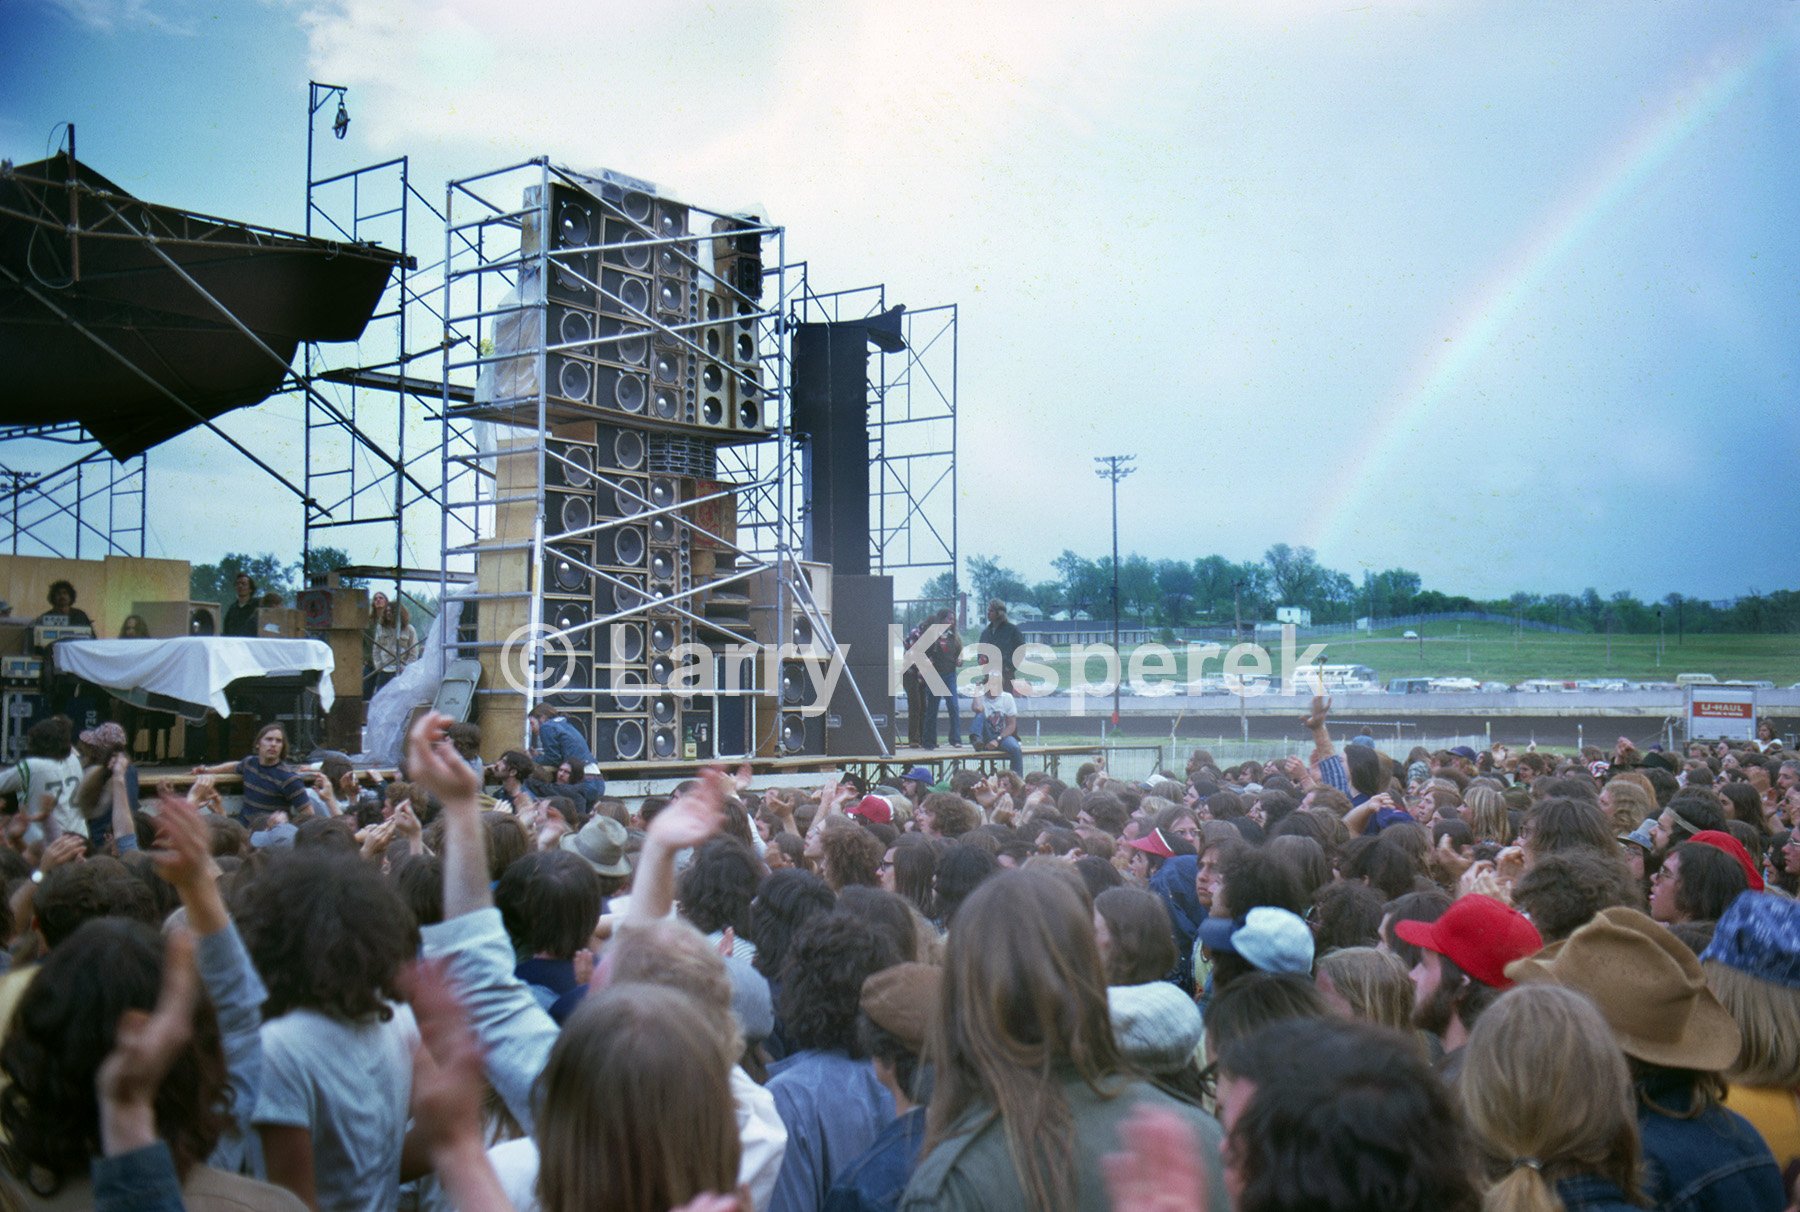  Des Moines, IA State Fairgrounds May 5, 1973 